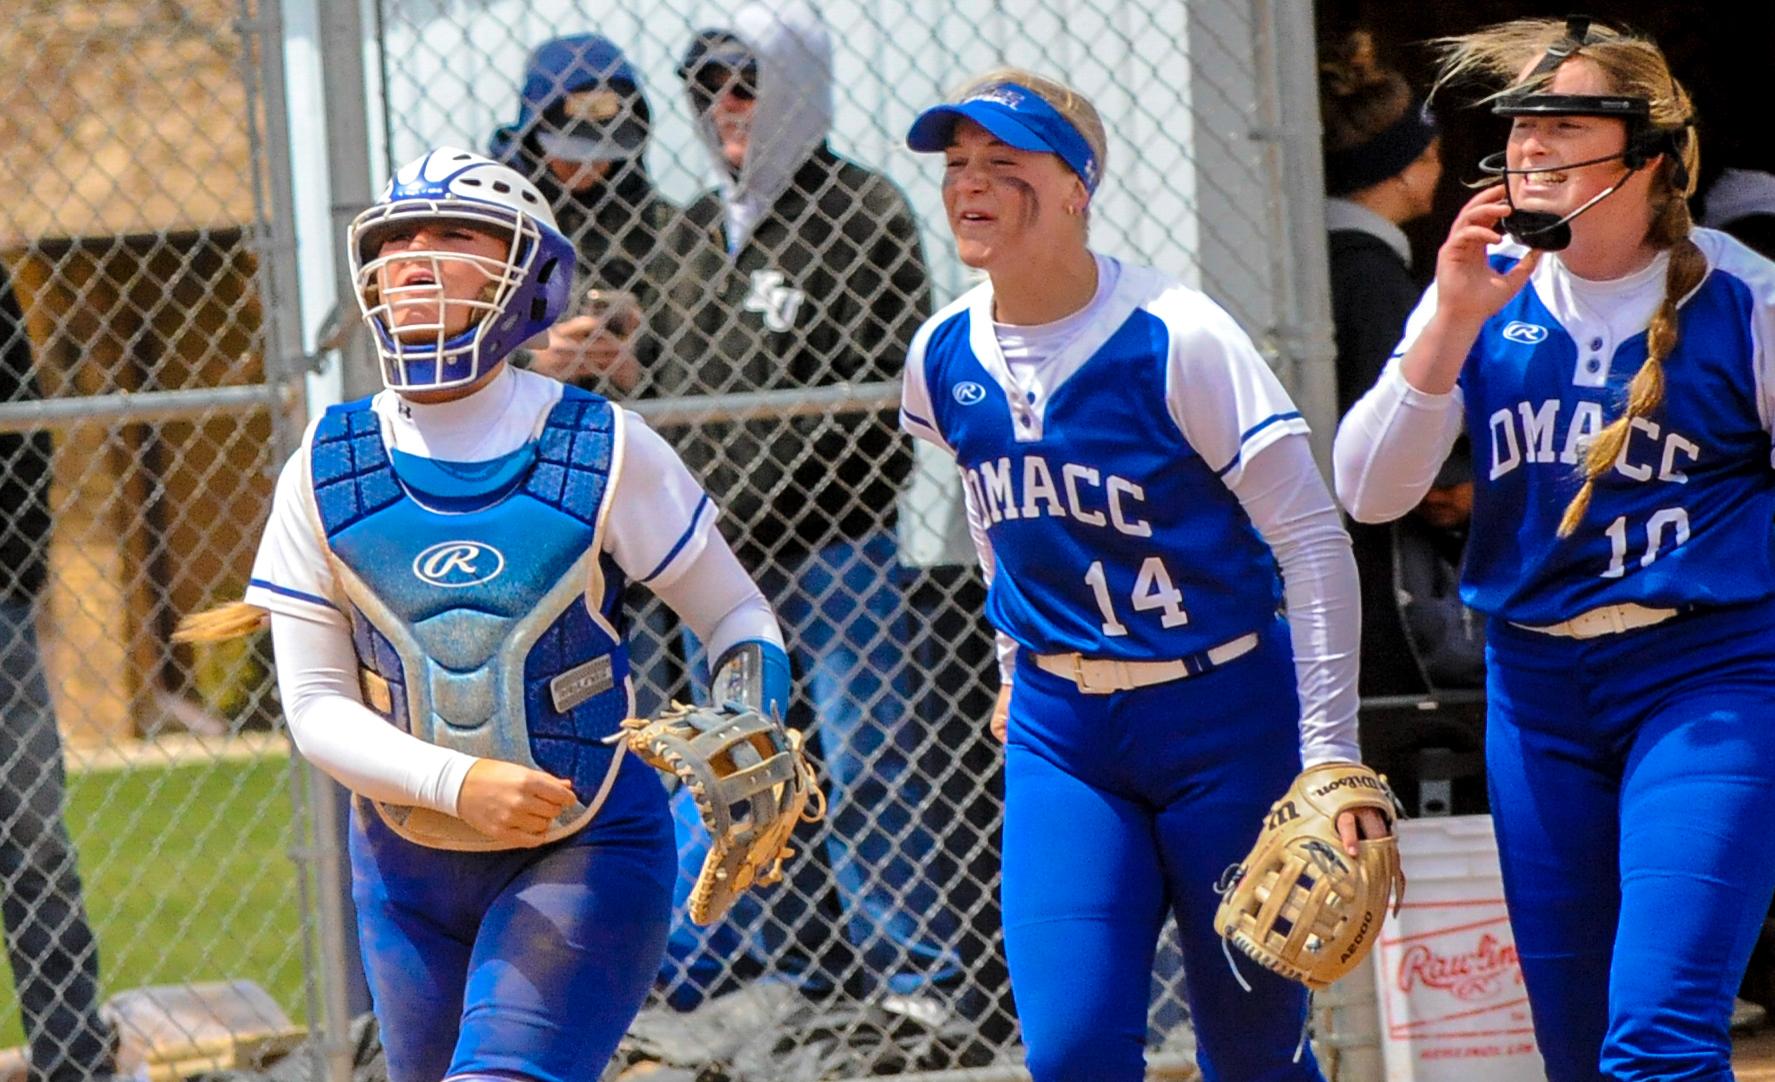 DMACC softball team splits two games on second day of NJCAA Division II World Series